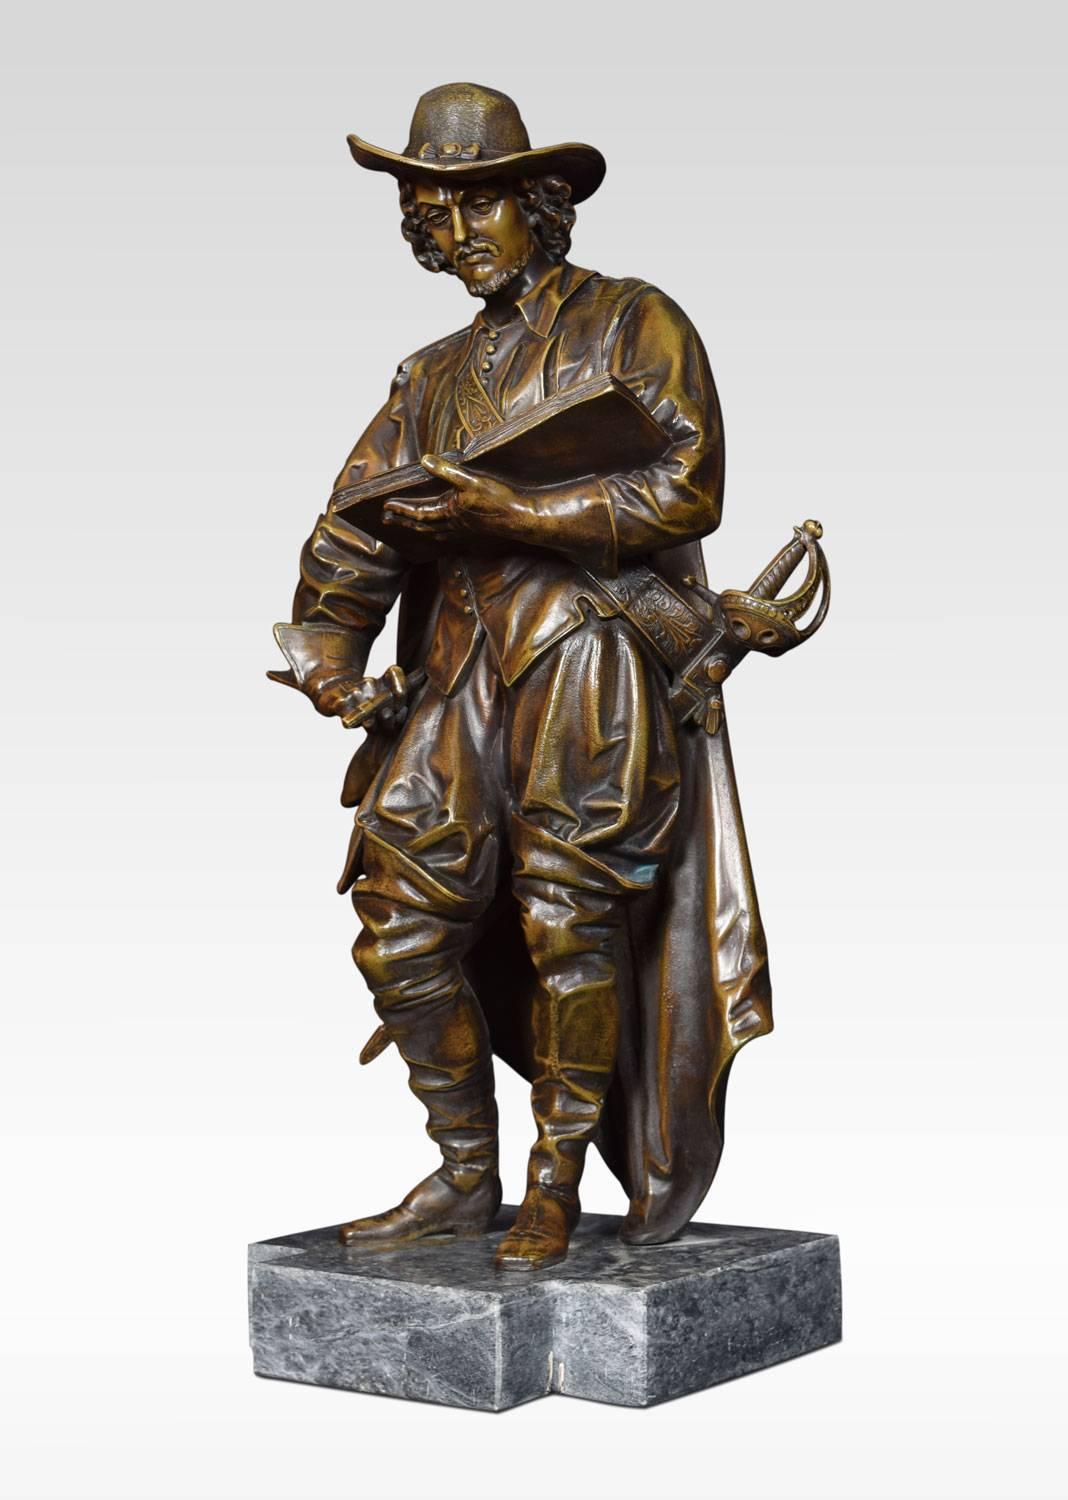 A pair of bronzed 18th century scholars in typical dress, raised up on marble plinth bases.
Dimensions
Height 25 inches
Width 10 inches
Depth 8 inches.